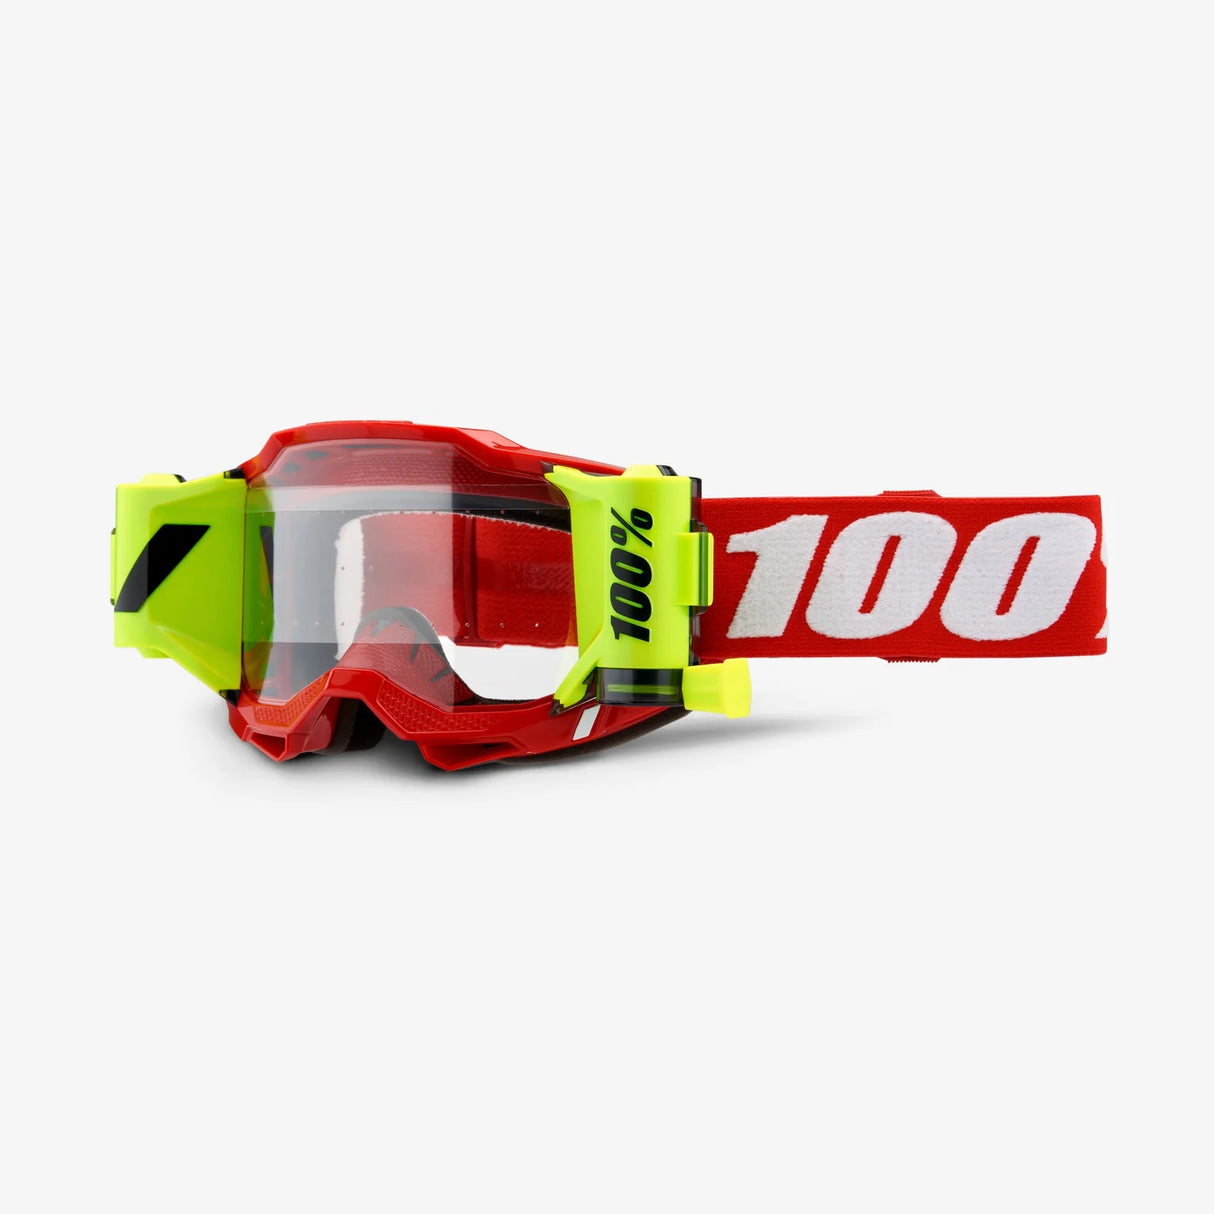 ACCURI 2 FORECAST GOGGLE NEON RED (CLEAR LENS)